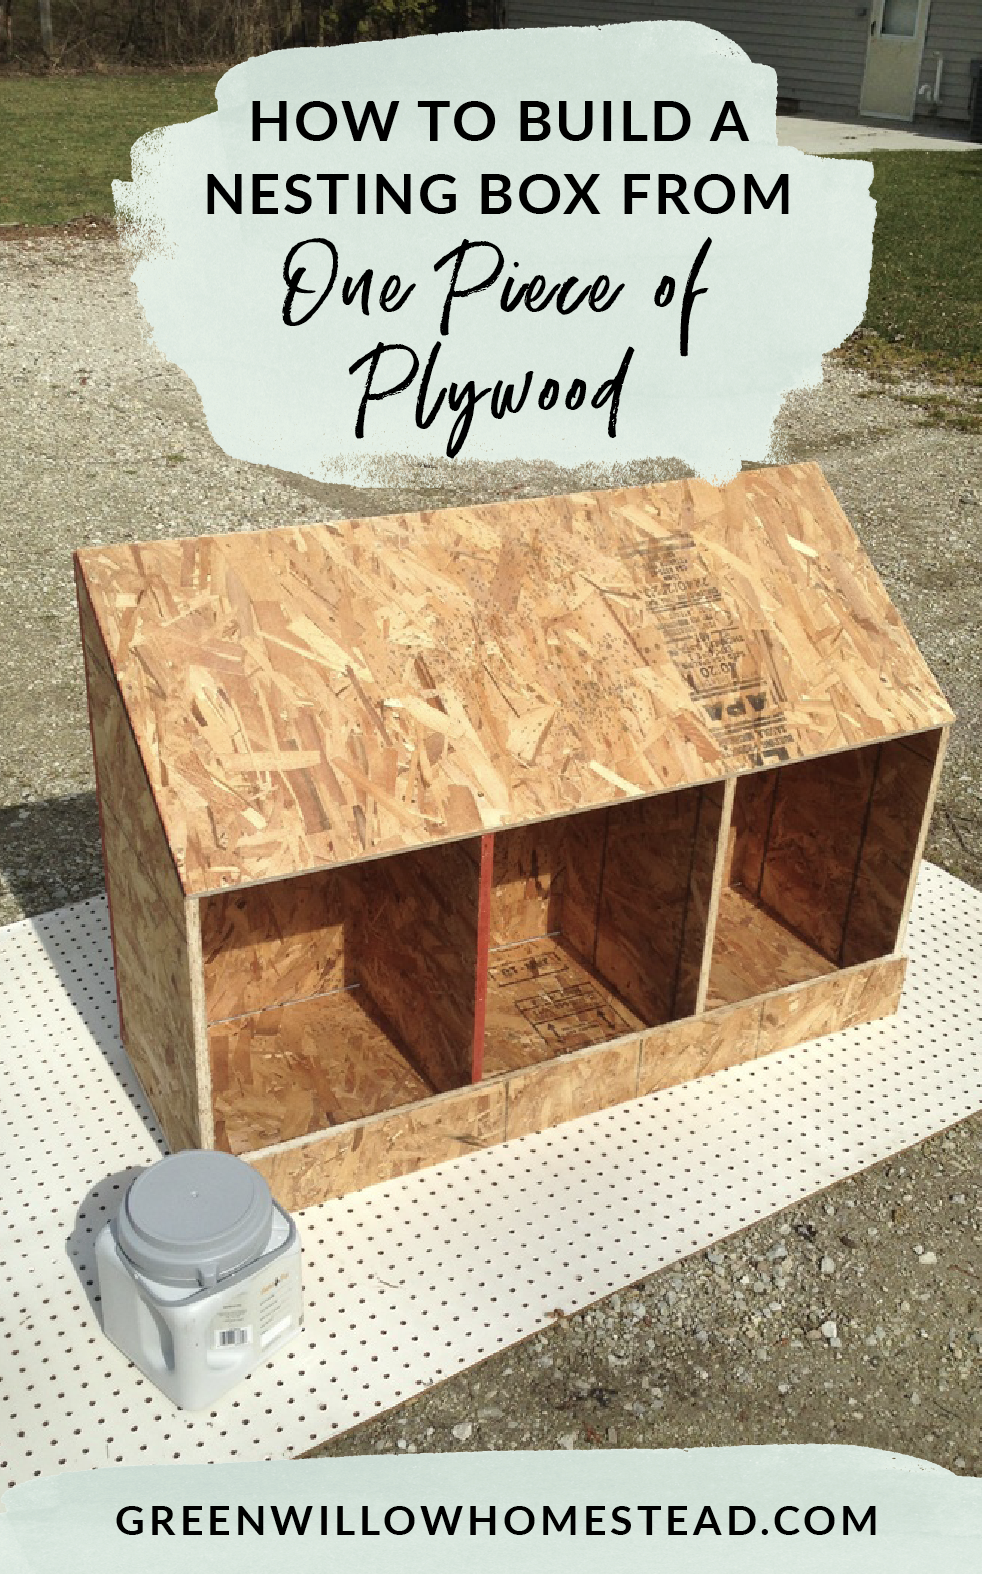 How to build a nesting box from one piece of plywood for your backyard chickens